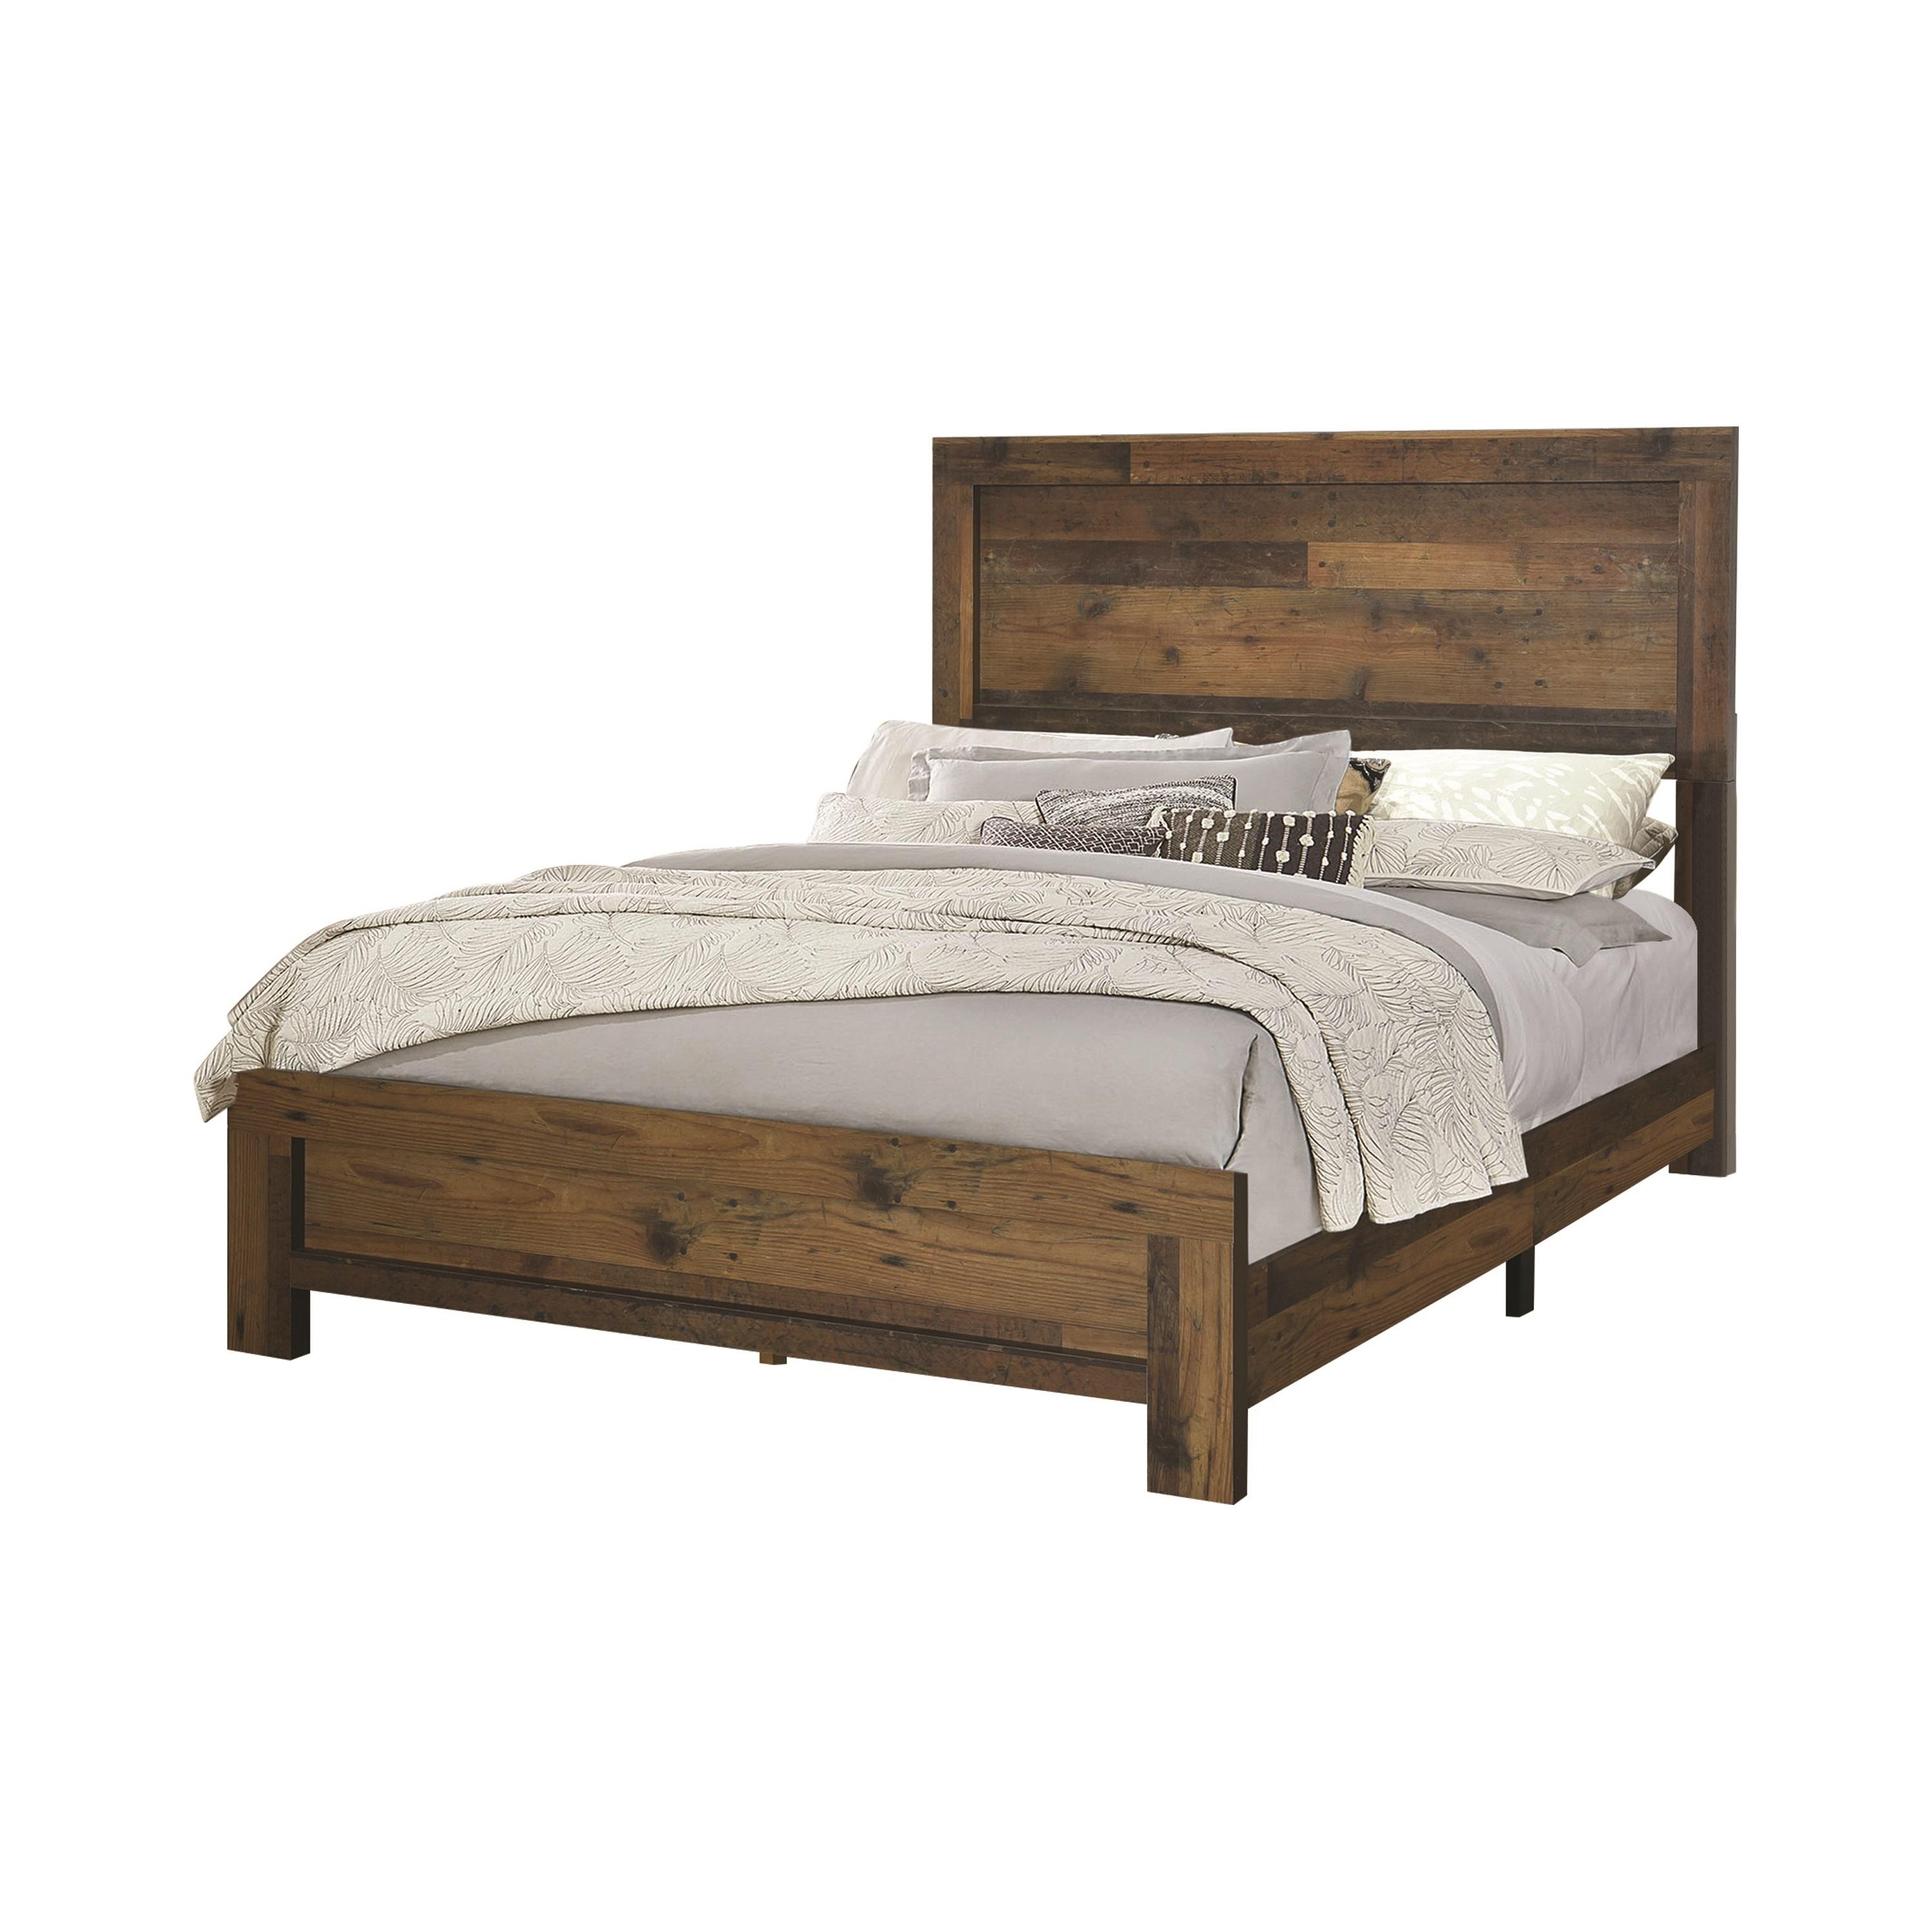 Rustic Bed 223141Q Sidney 223141Q in Brown 